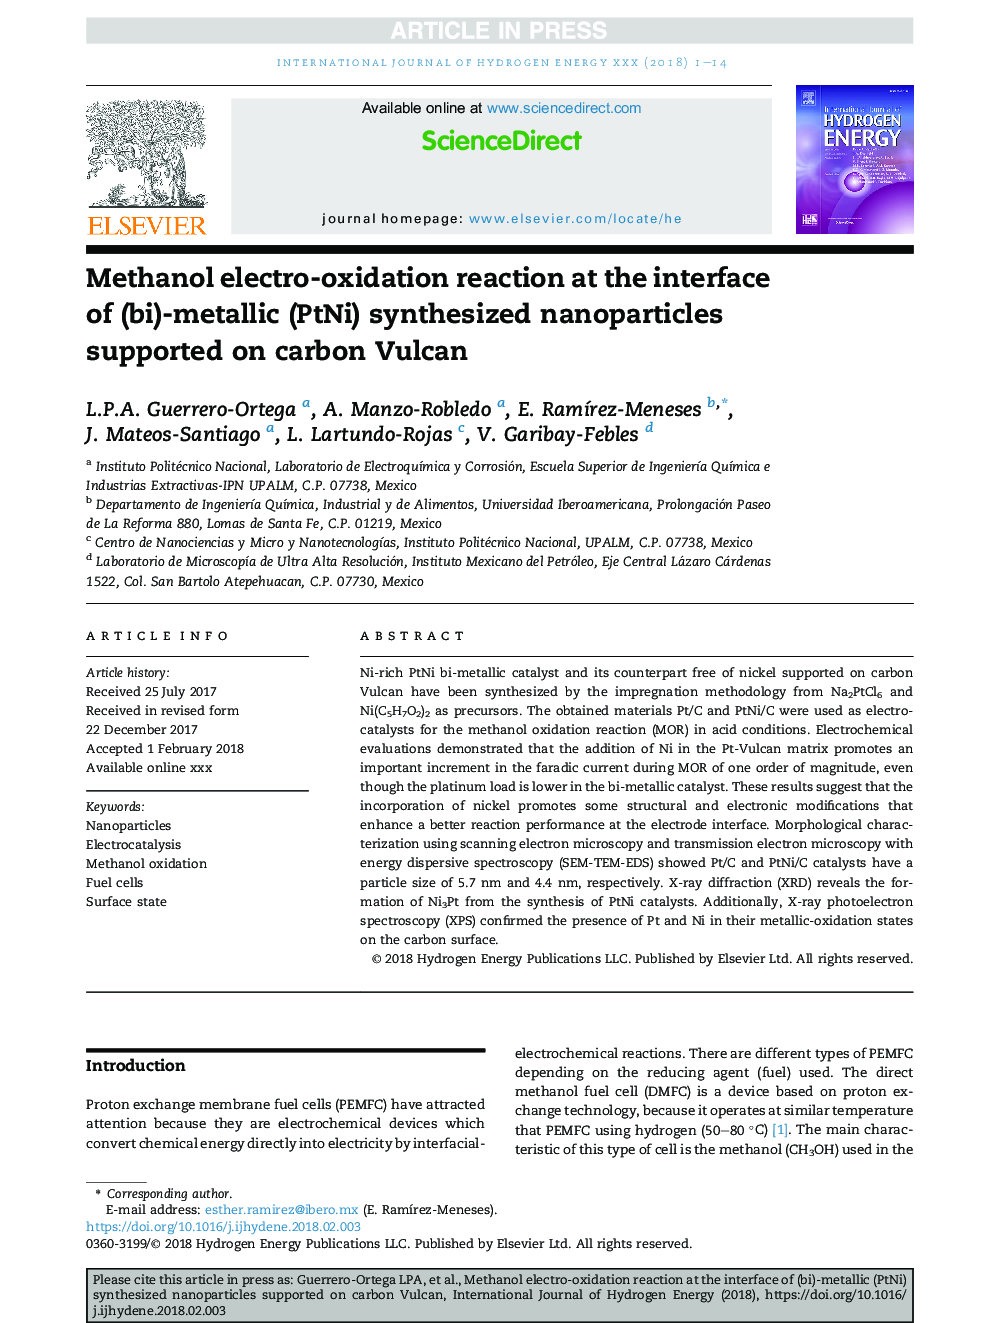 Methanol electro-oxidation reaction at the interface of (bi)-metallic (PtNi) synthesized nanoparticles supported on carbon Vulcan